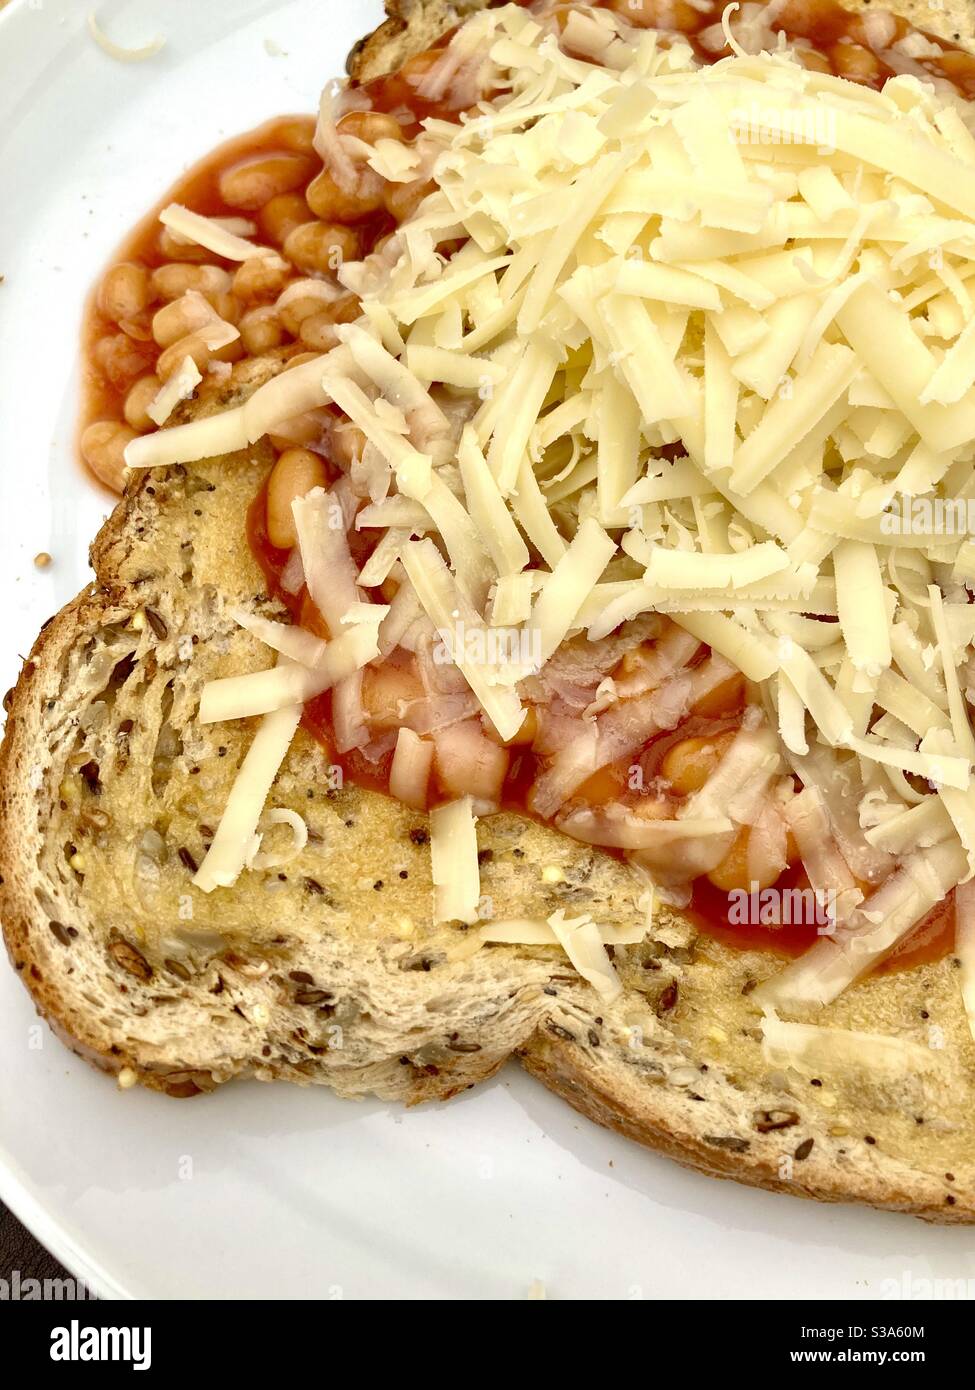 Baked beans on wholemeal seeded toast with grated cheese Stock Photo